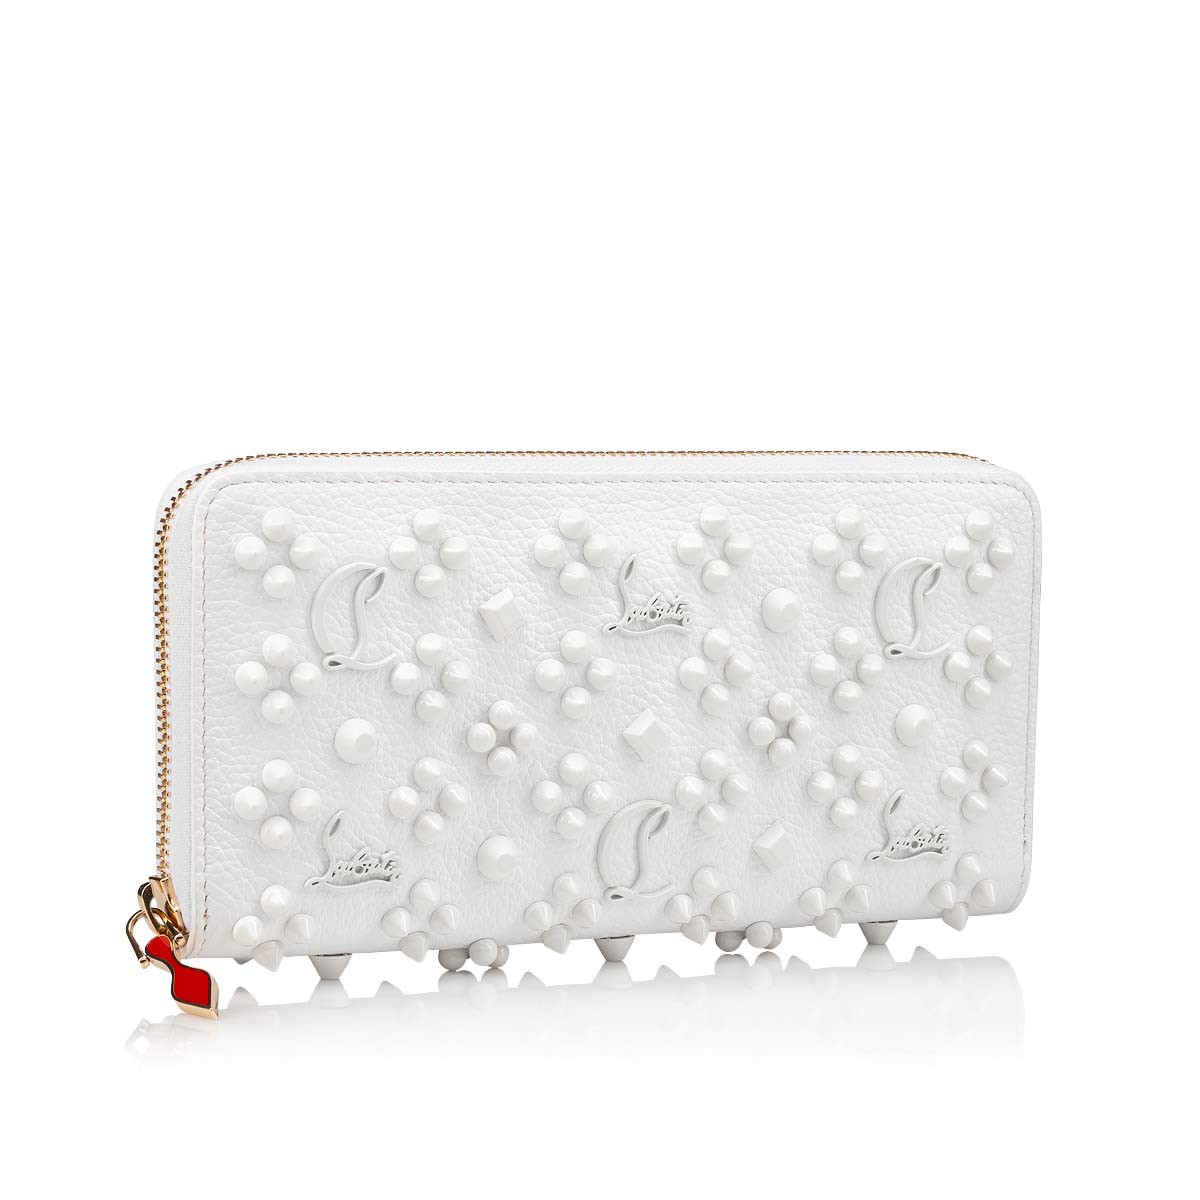 Shop Christian Louboutin Panettone Panettone Wallet (1185059CM6S) by  baies2018